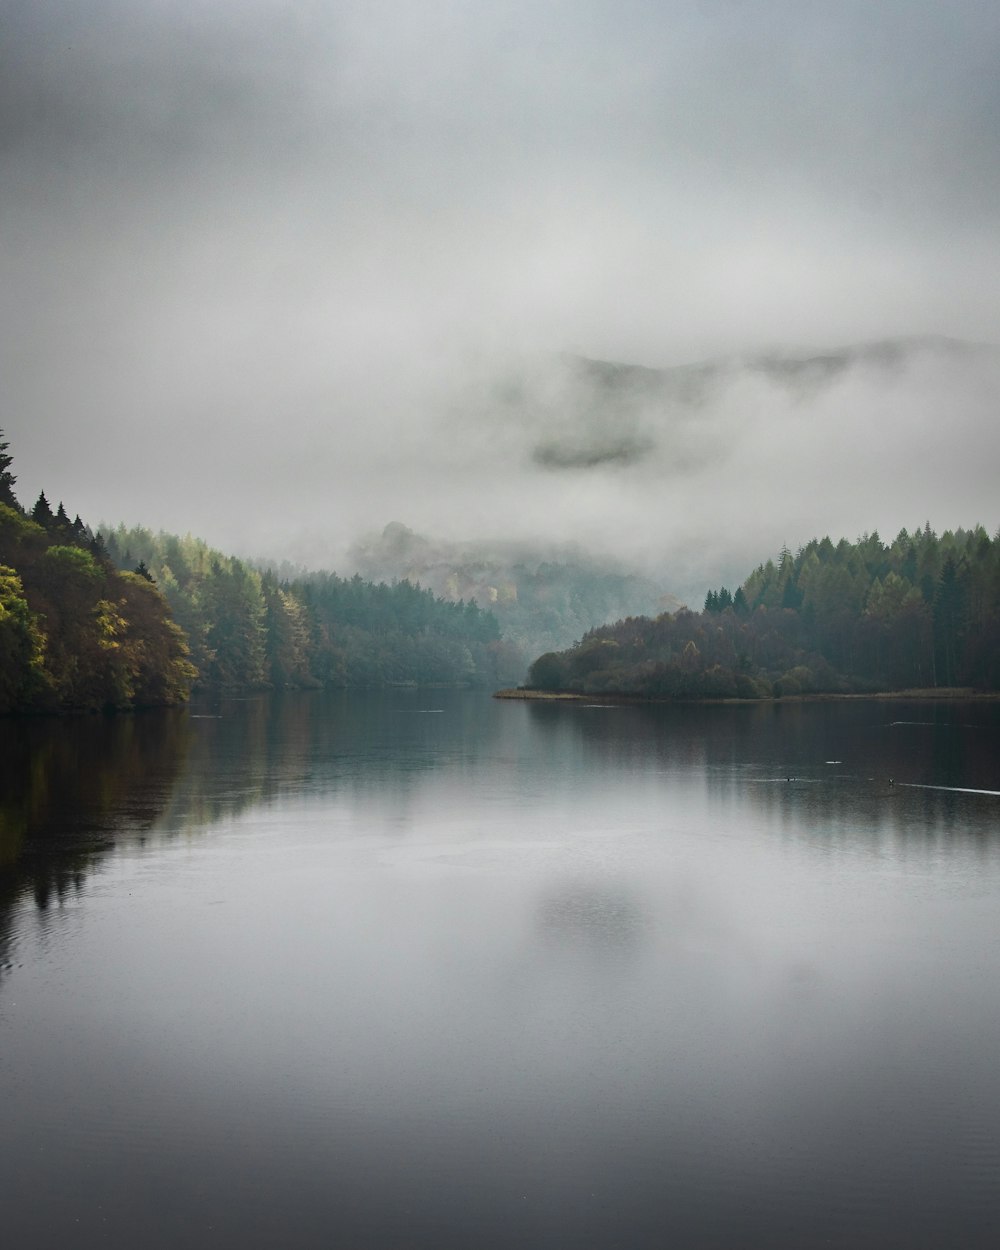 body of water surrounded with green trees viewing mountain ion foggy day